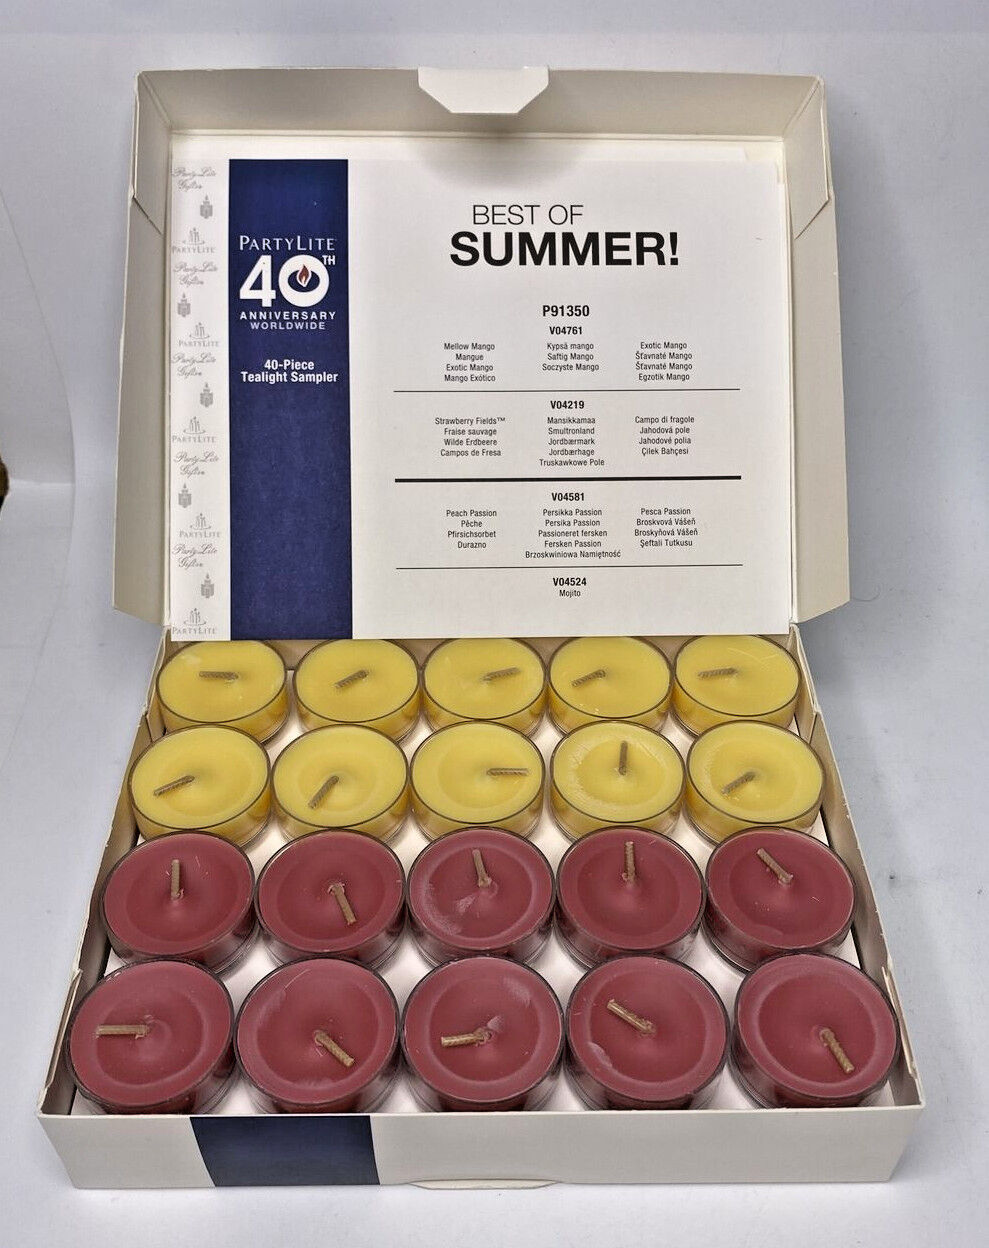 Primary image for PartyLite 40th Anniversary 40 pc Best of Summer TeaLight Sampler New P2B/P91350